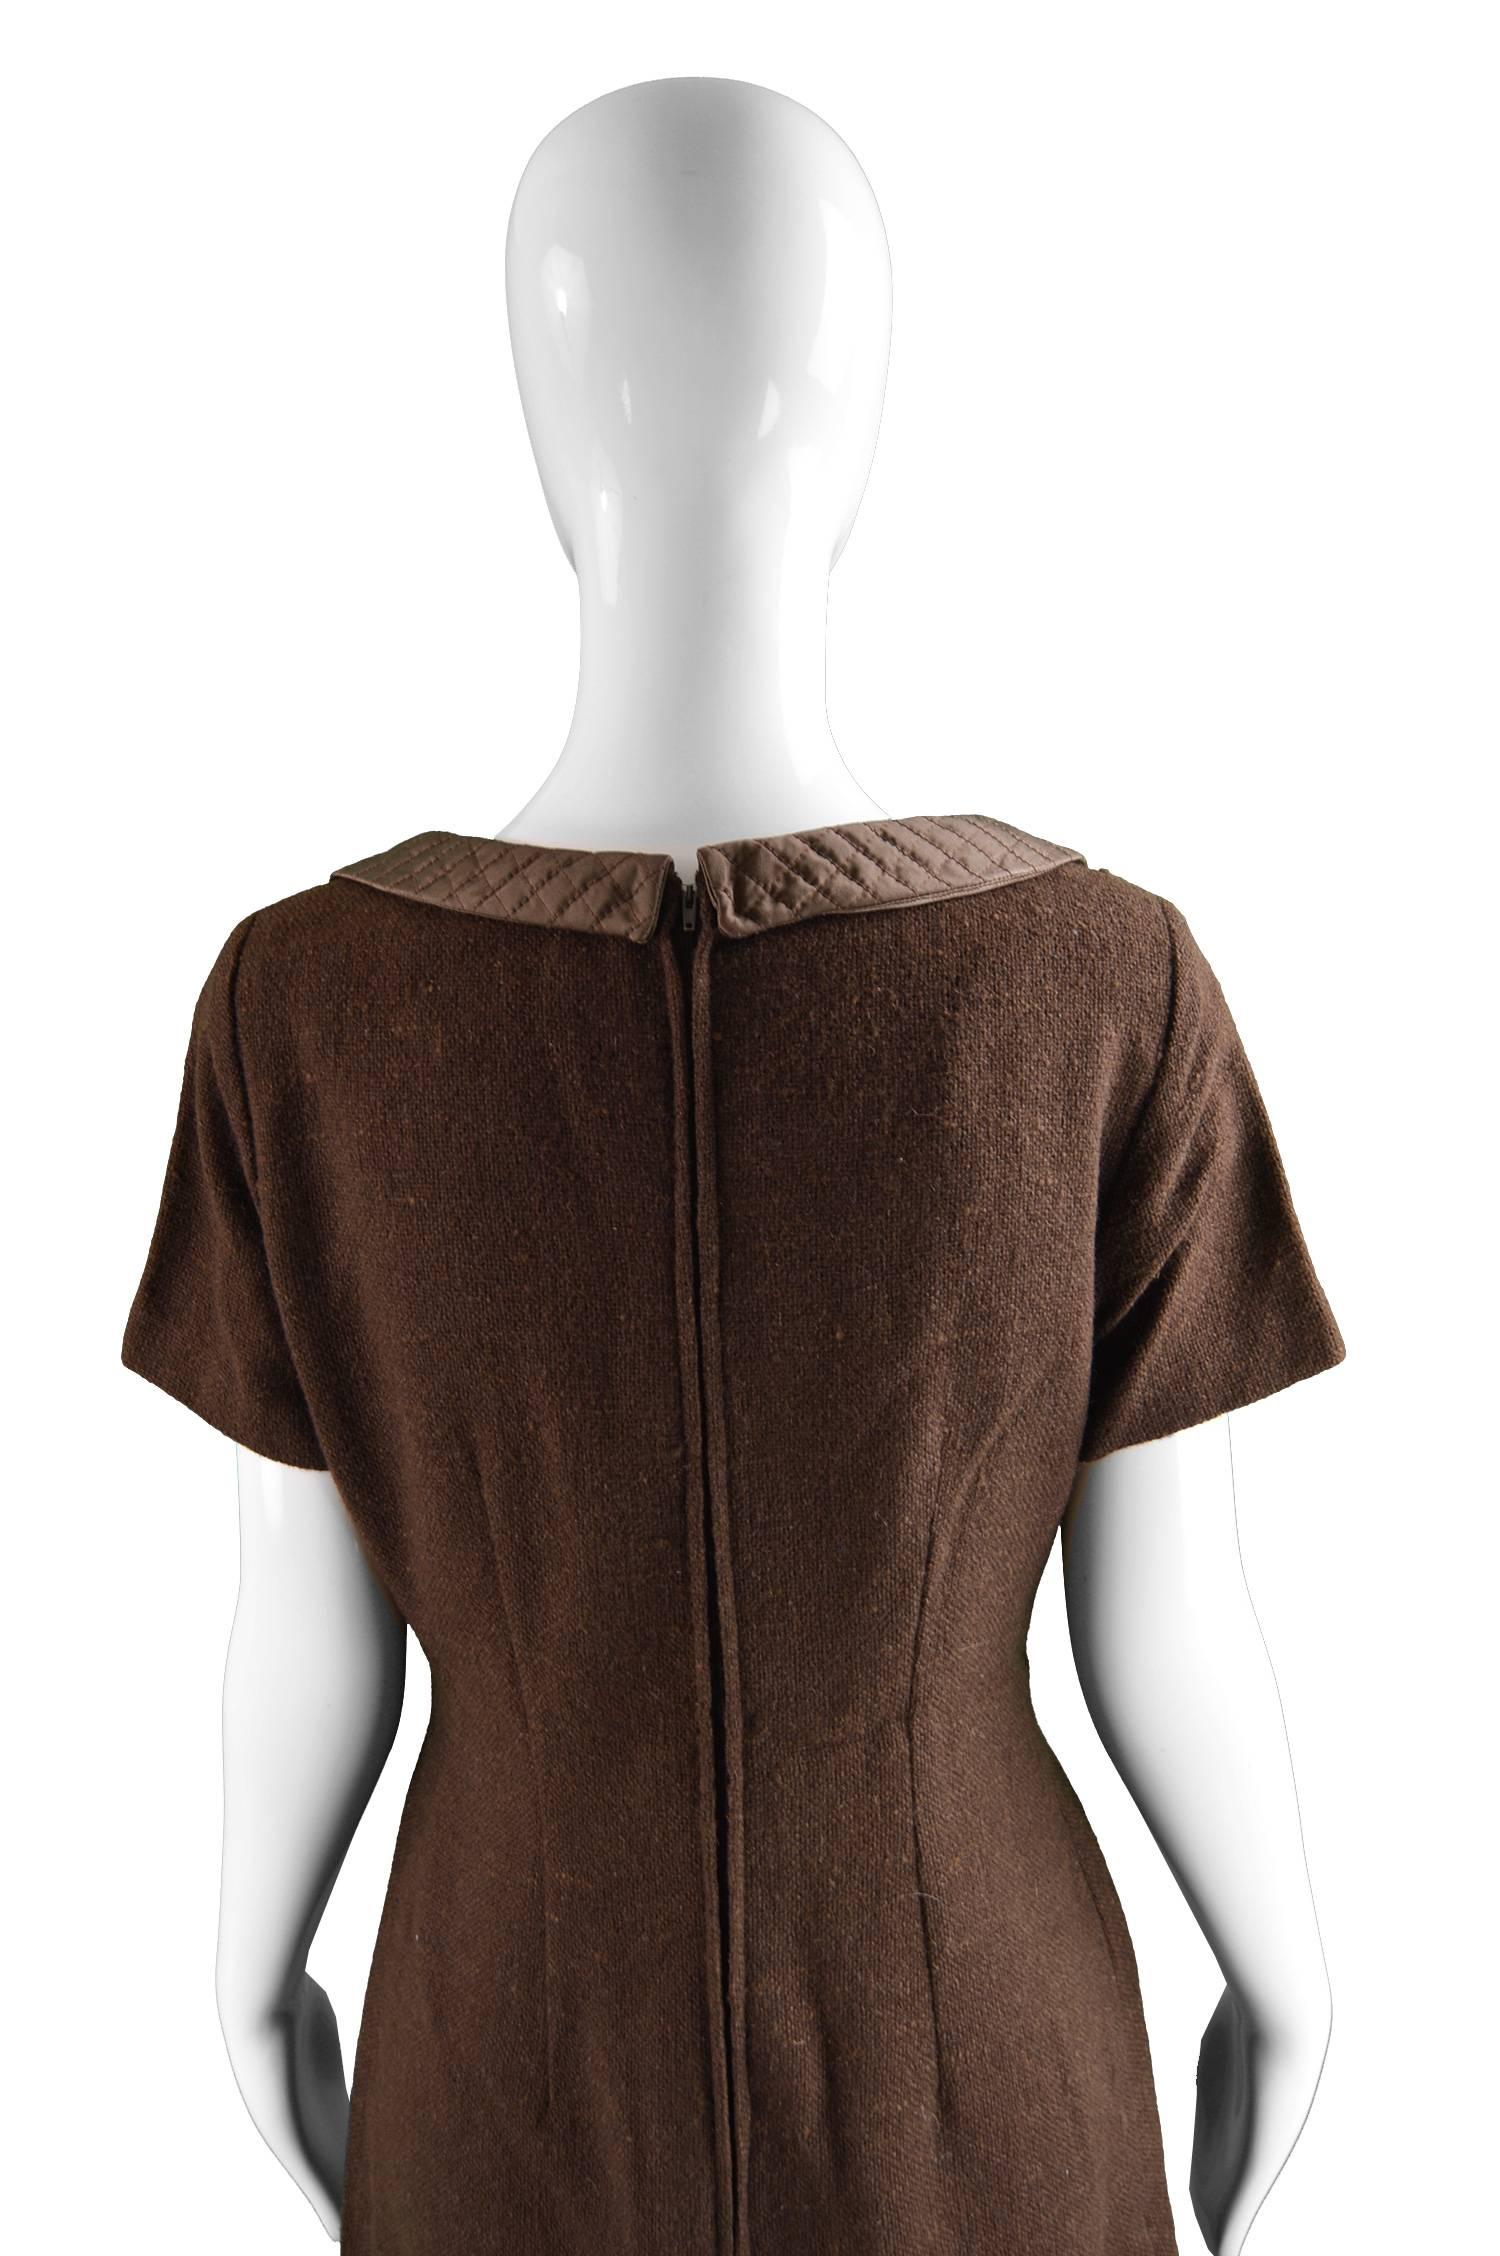 Marcel Fenez Vintage Brown Wool Dress with Quilted Peter Pan Collar 1960s 2